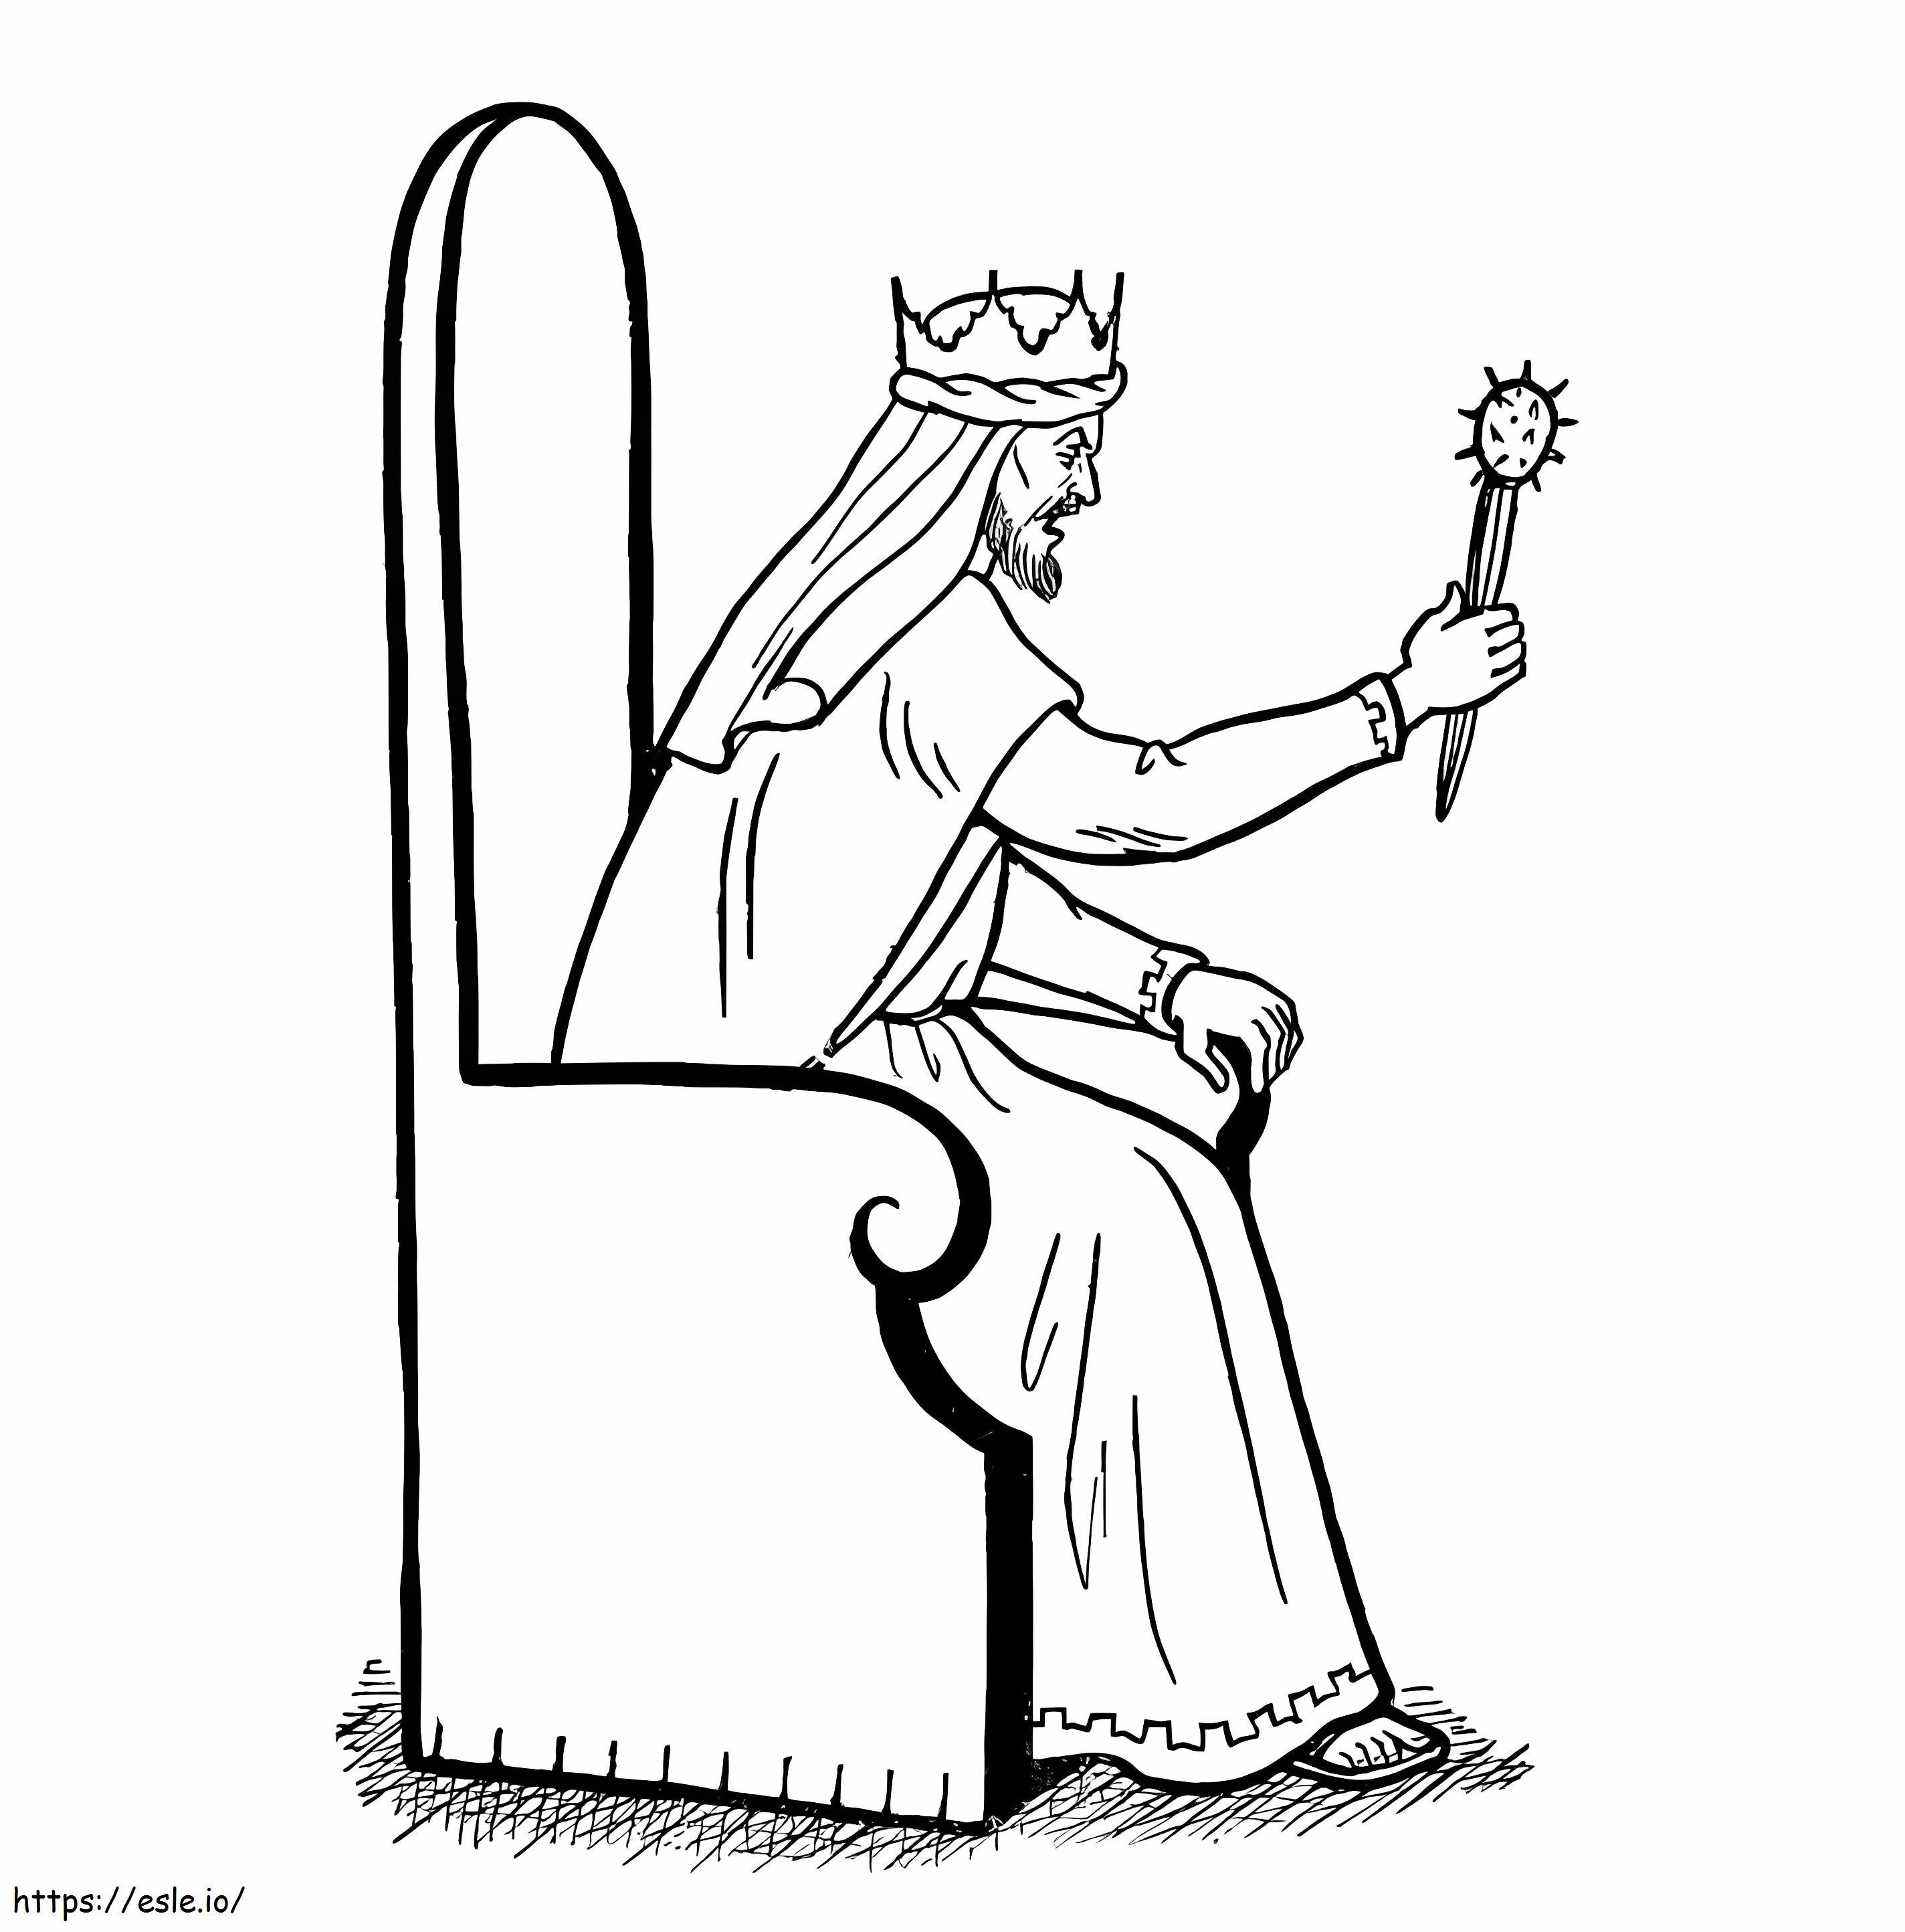 Angry King Sitting On A Chair coloring page